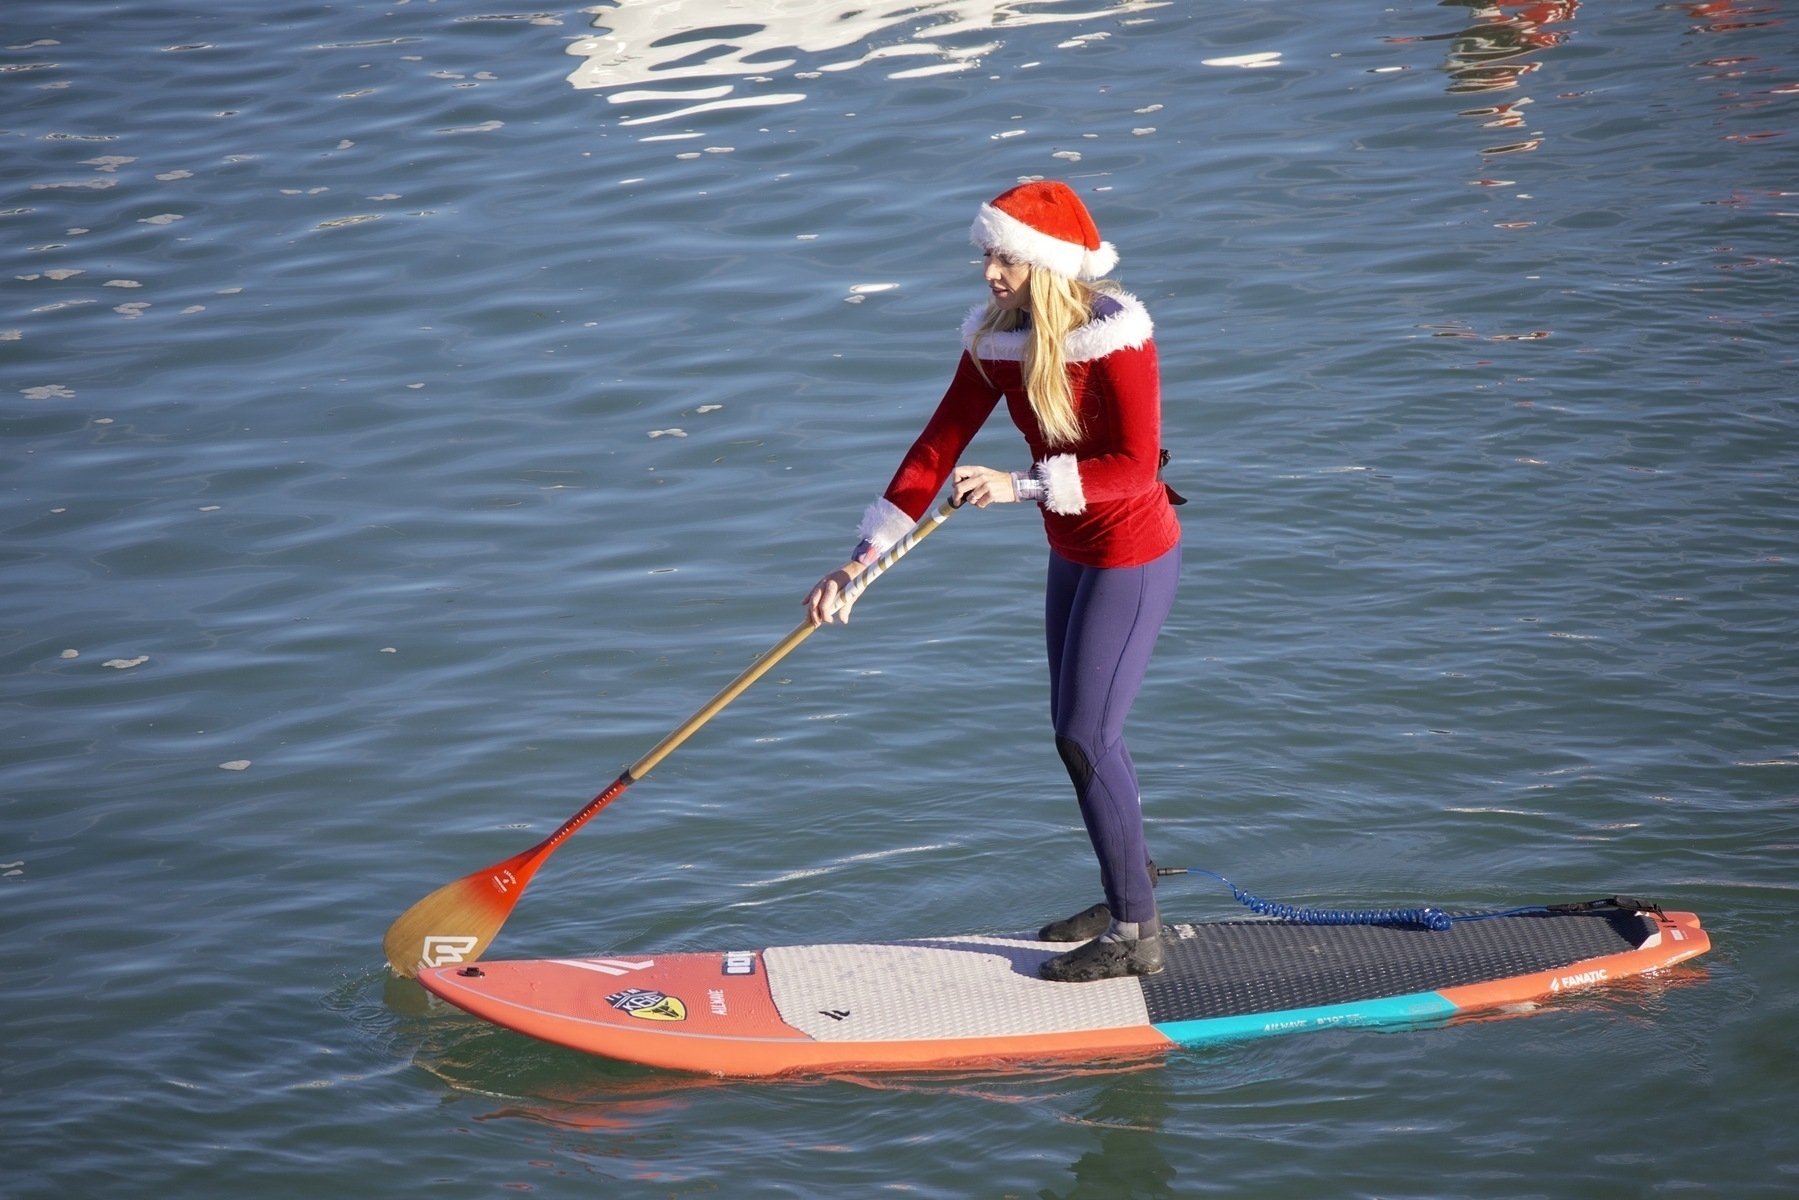 A stand-up paddleboarder in a Santa dress 